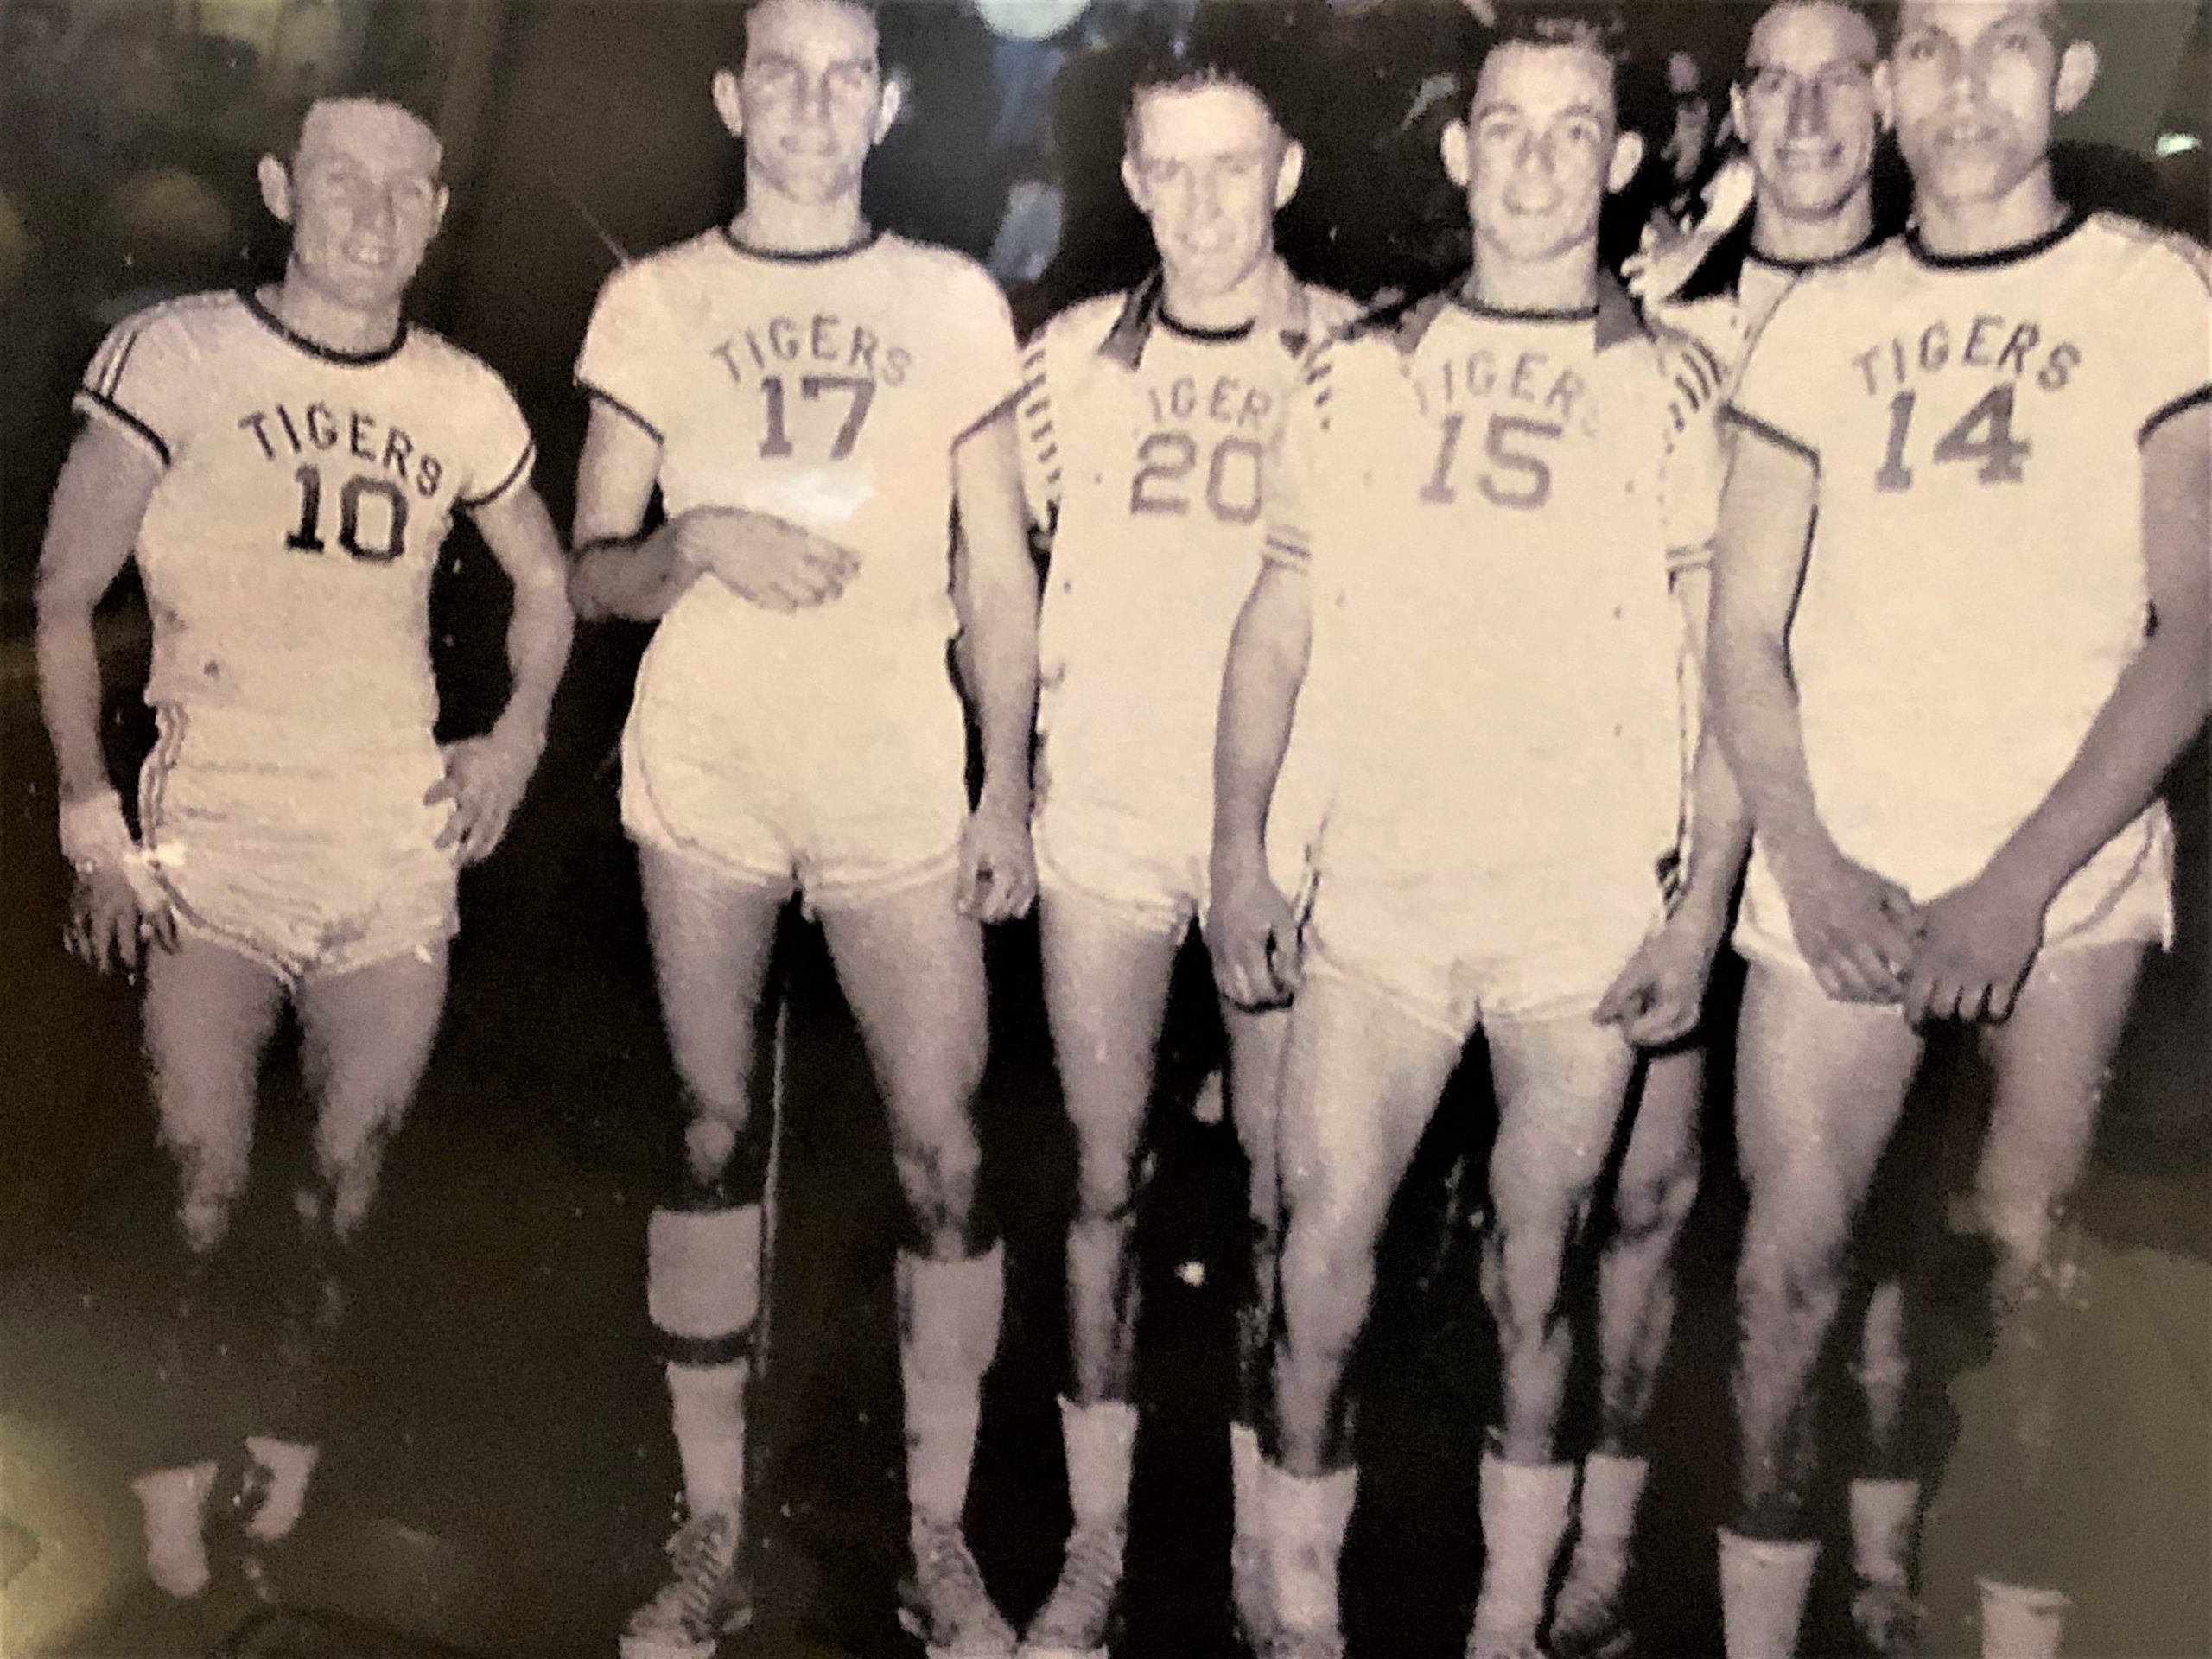 A black and white photo of a youth basketball team in which Don Meredith is wearing calf supports